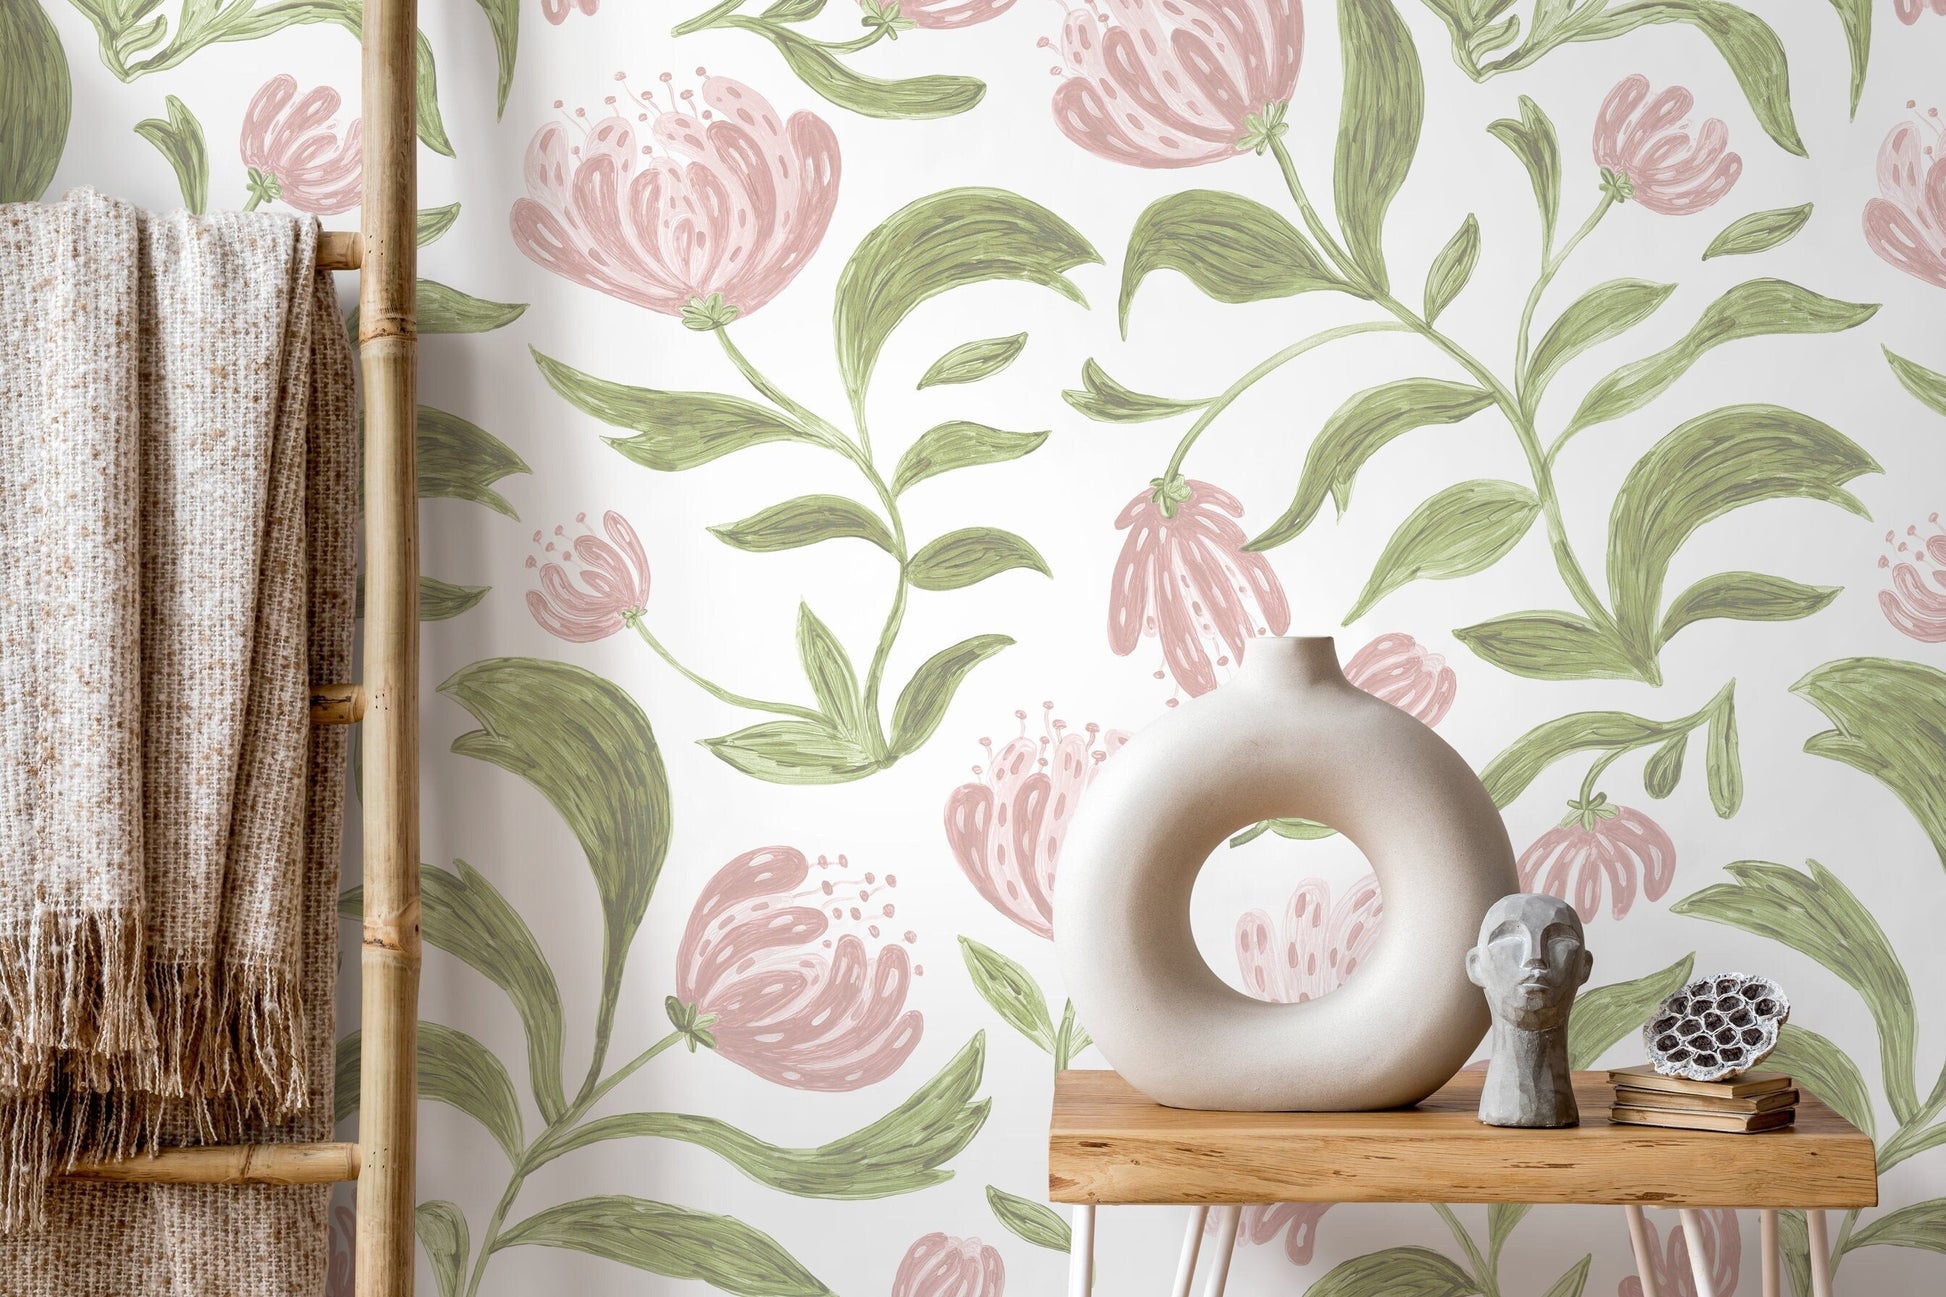 Green Pink Floral Wallpaper, Removable Wallpaper, Peel And Stick Wallpaper, Adhesive Wallpaper